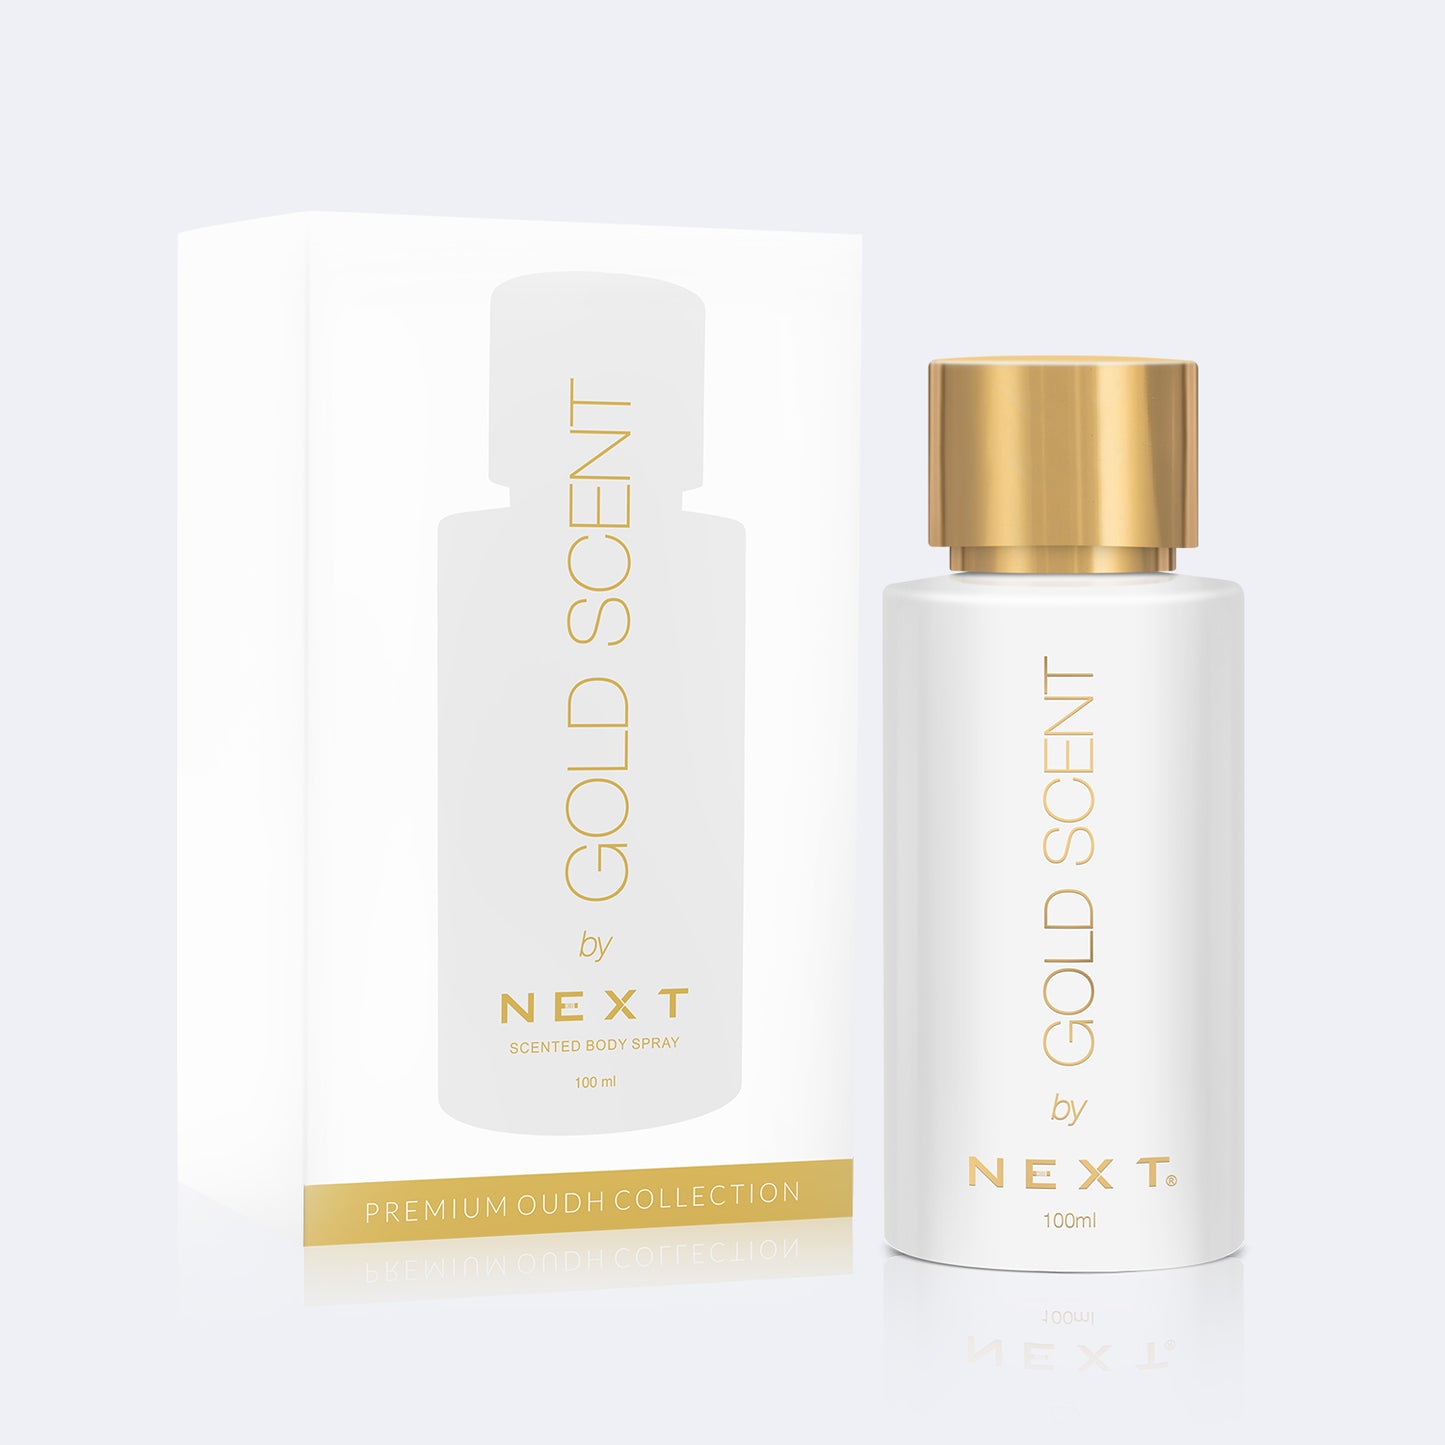 NEXT Gold Scent Oud Perfume - 100ml